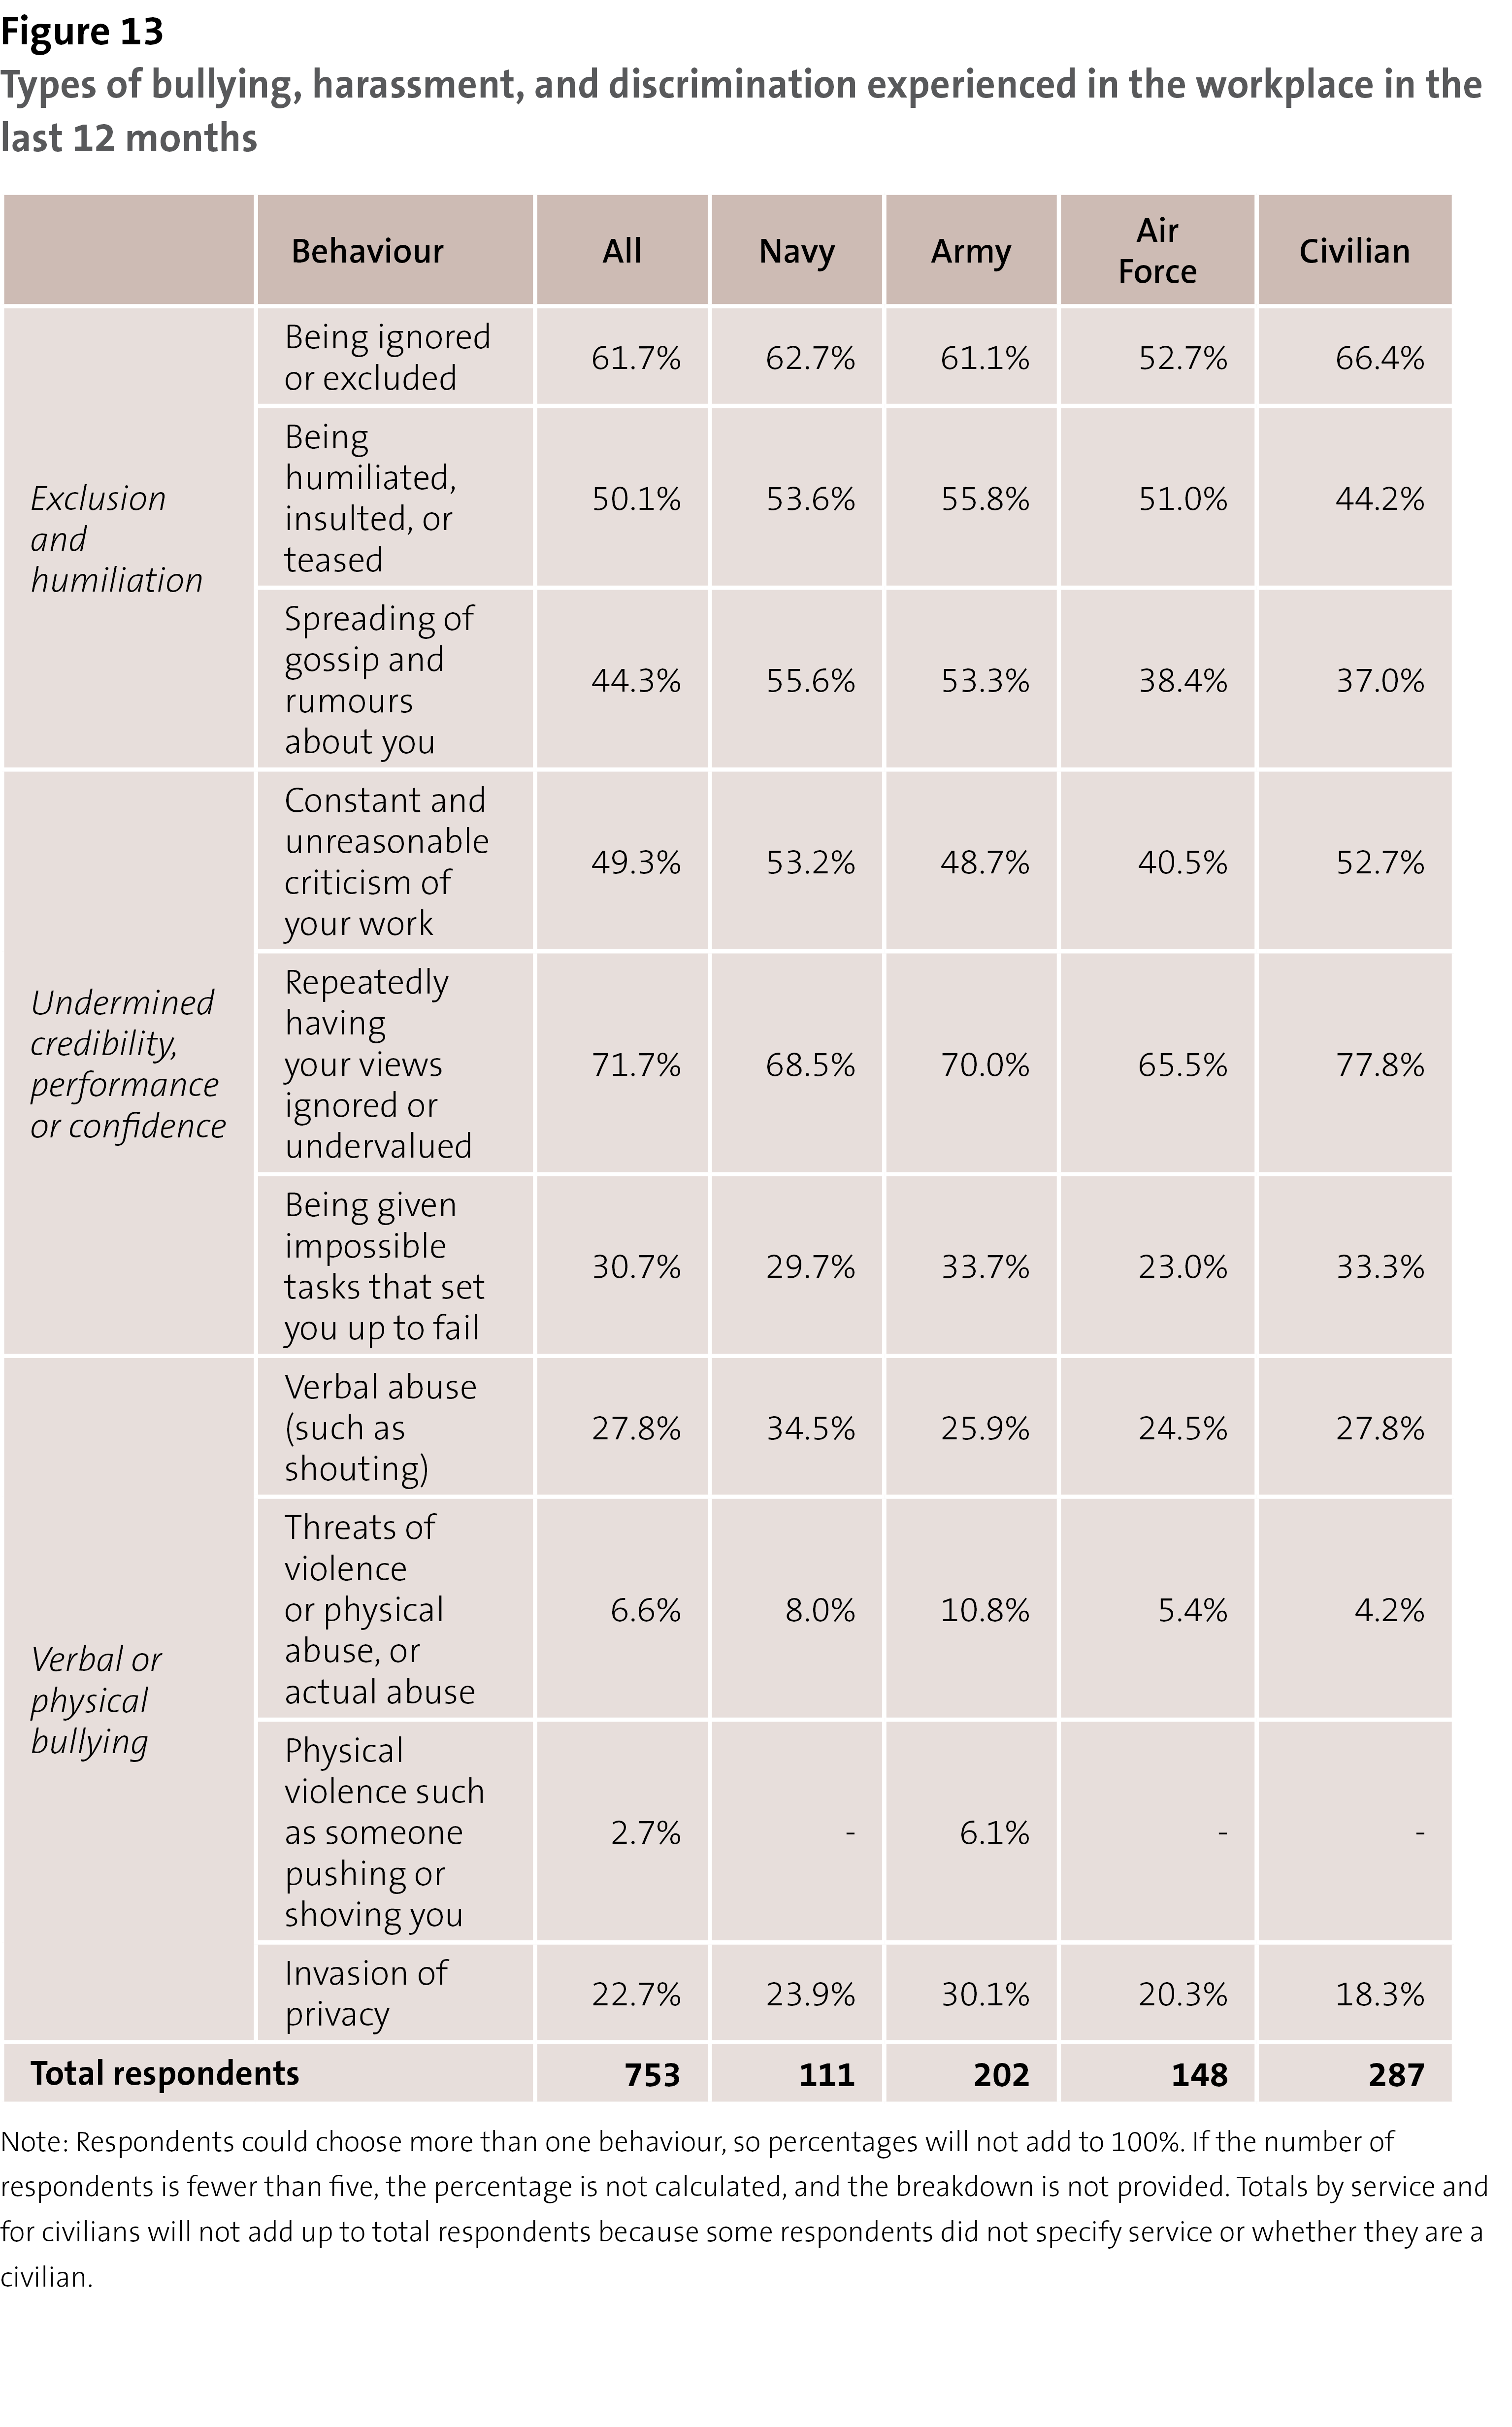 Figure 13 - Types of bullying, harassment, and discrimination experienced in the workplace in the last 12 months